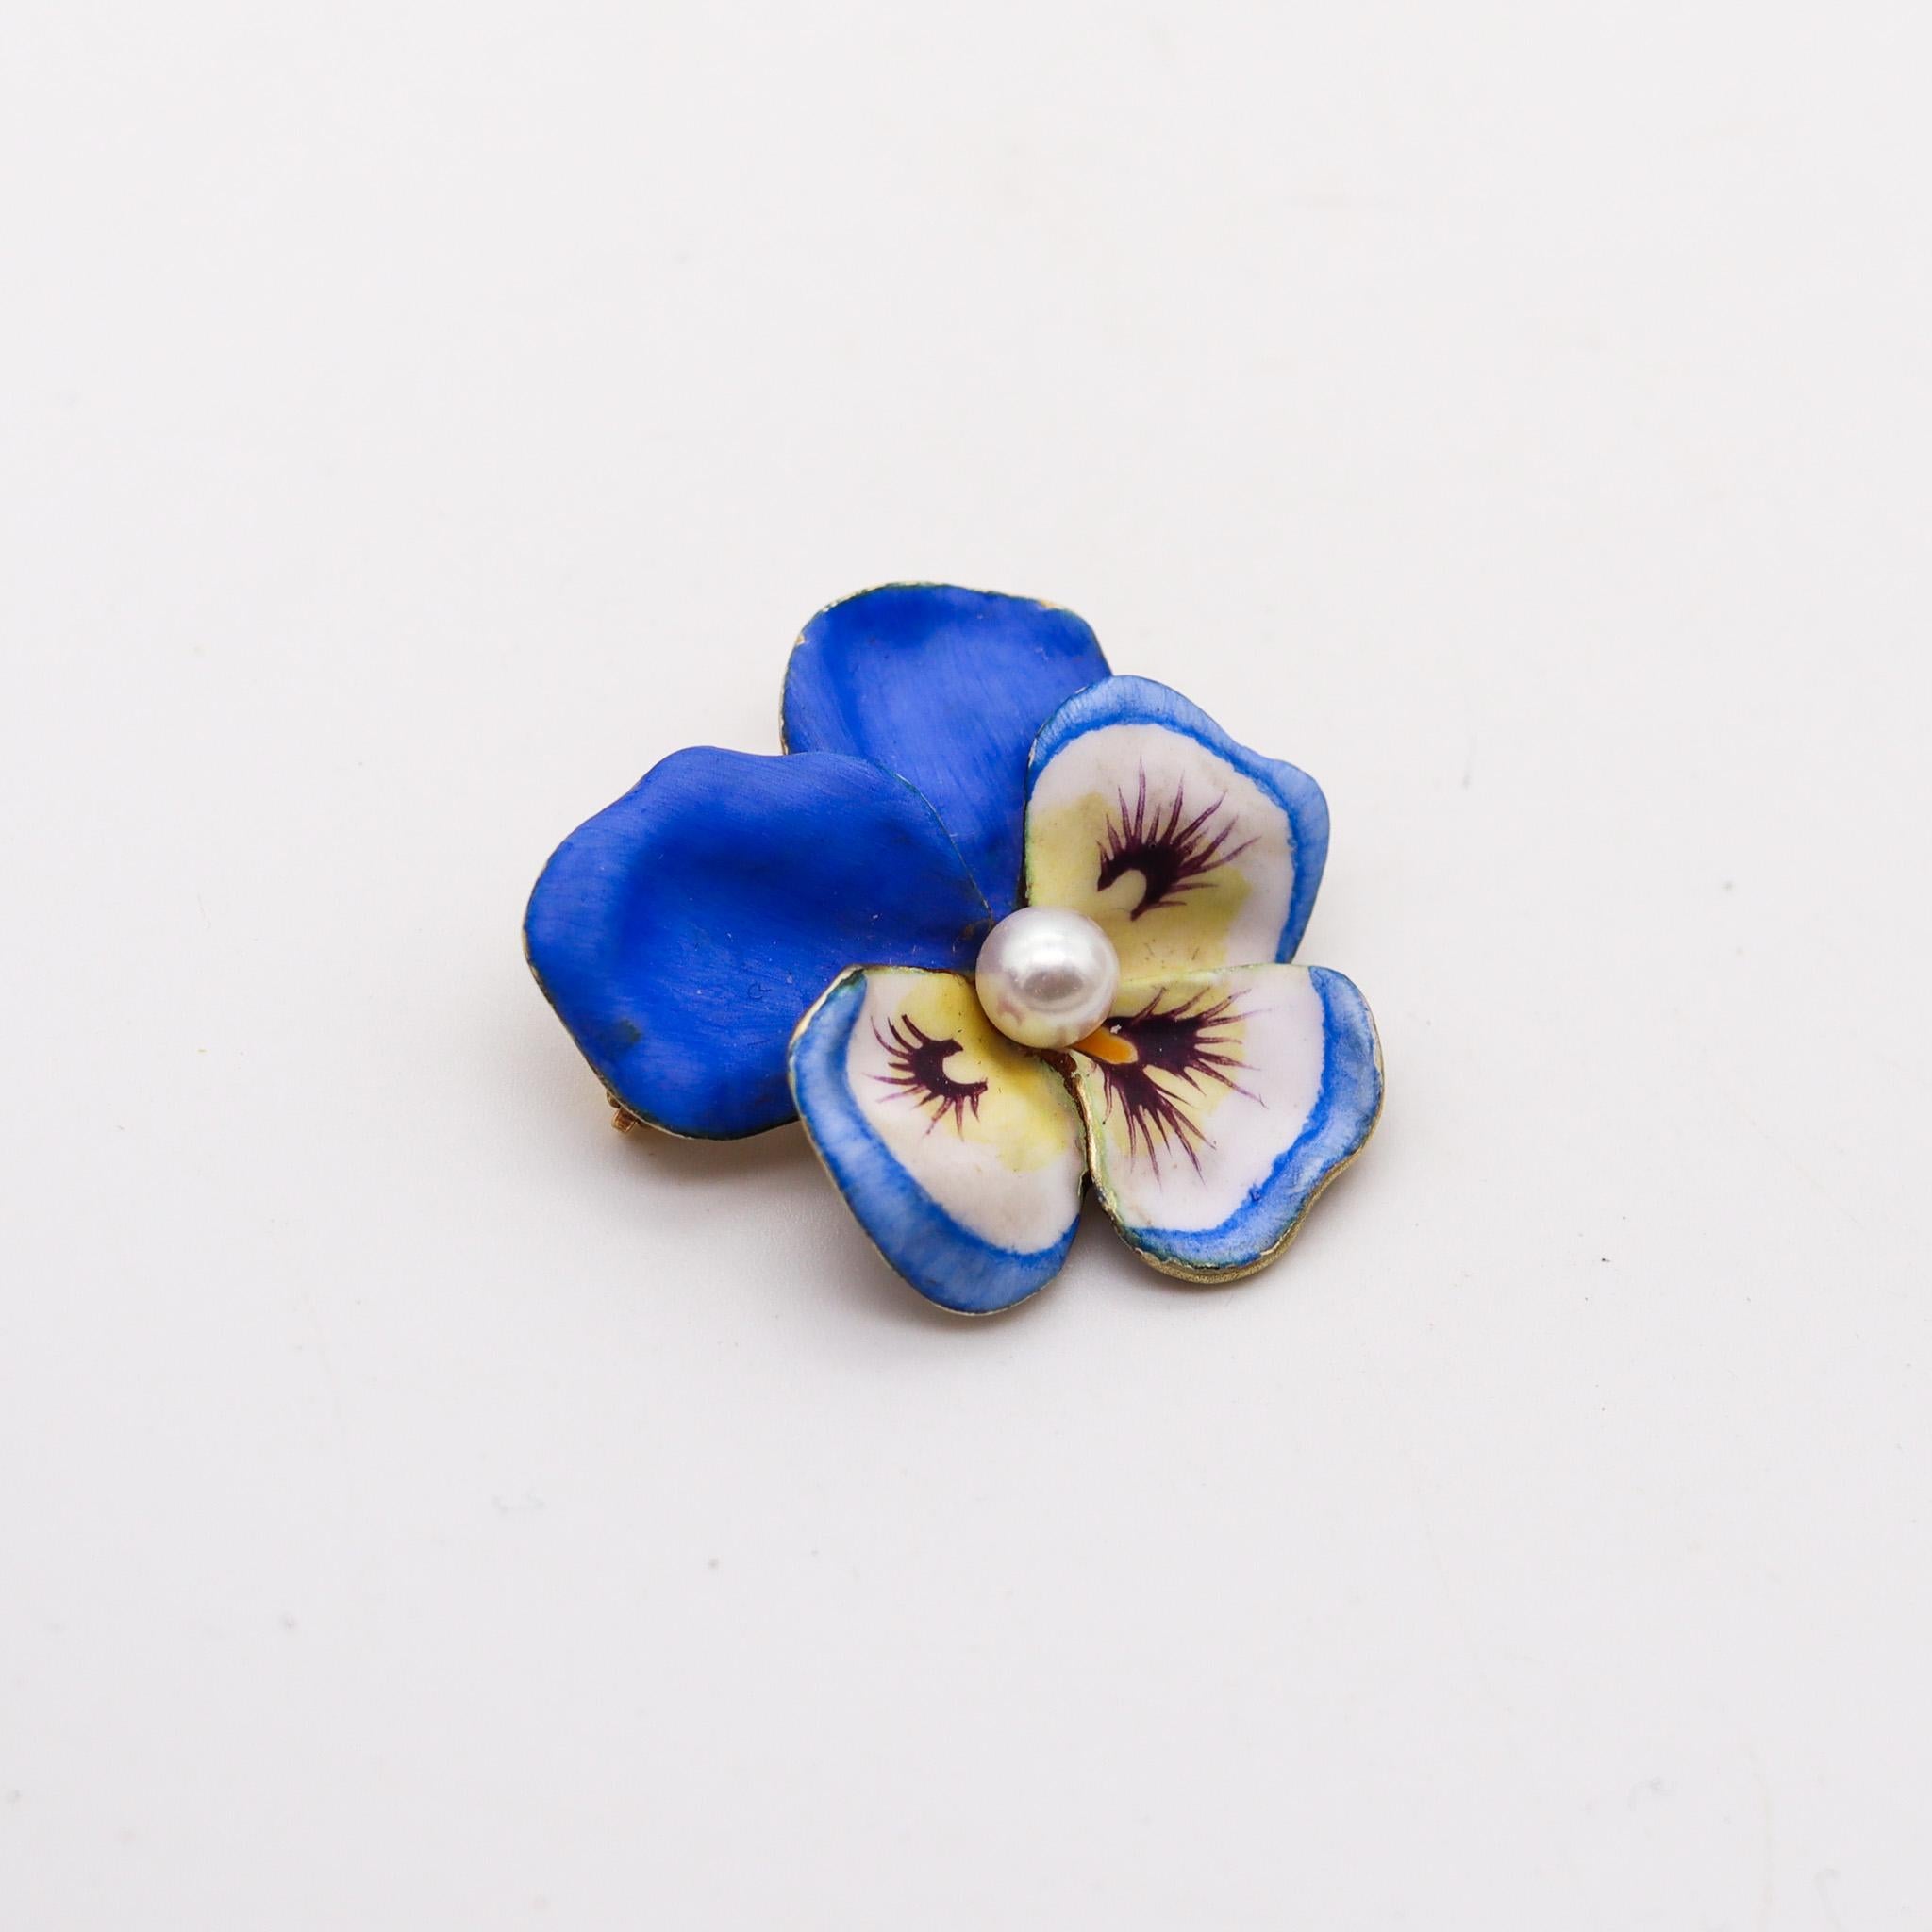 Enameled flower brooch designed by Larter & Son.

A pristine Edwardian art Nouveau flower brooch, created in Newark New Jersey by the jewelry company of Larter & Sons., back in the 1900. This beautiful brooch has been carefully crafted in solid